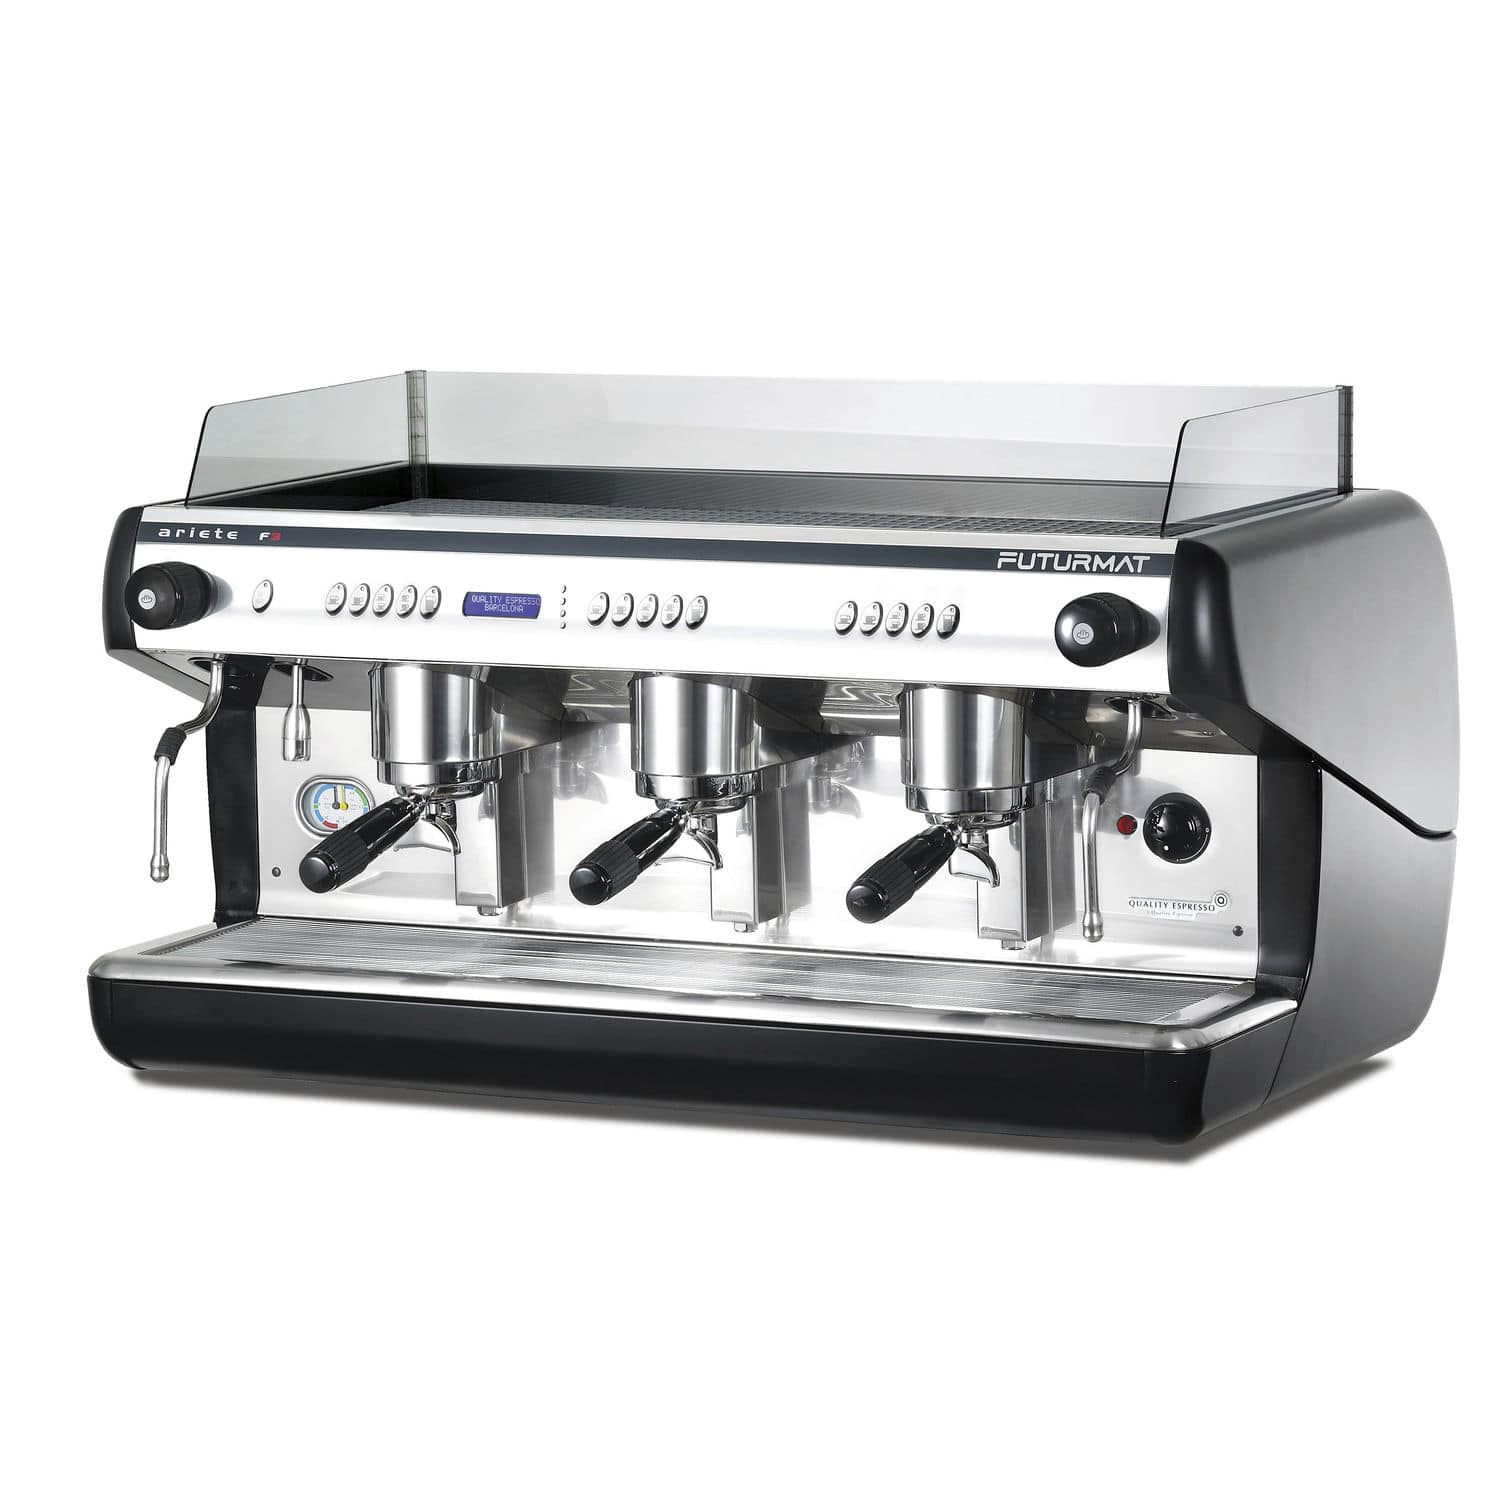 How Much Does A Commercial Coffee Machine Cost